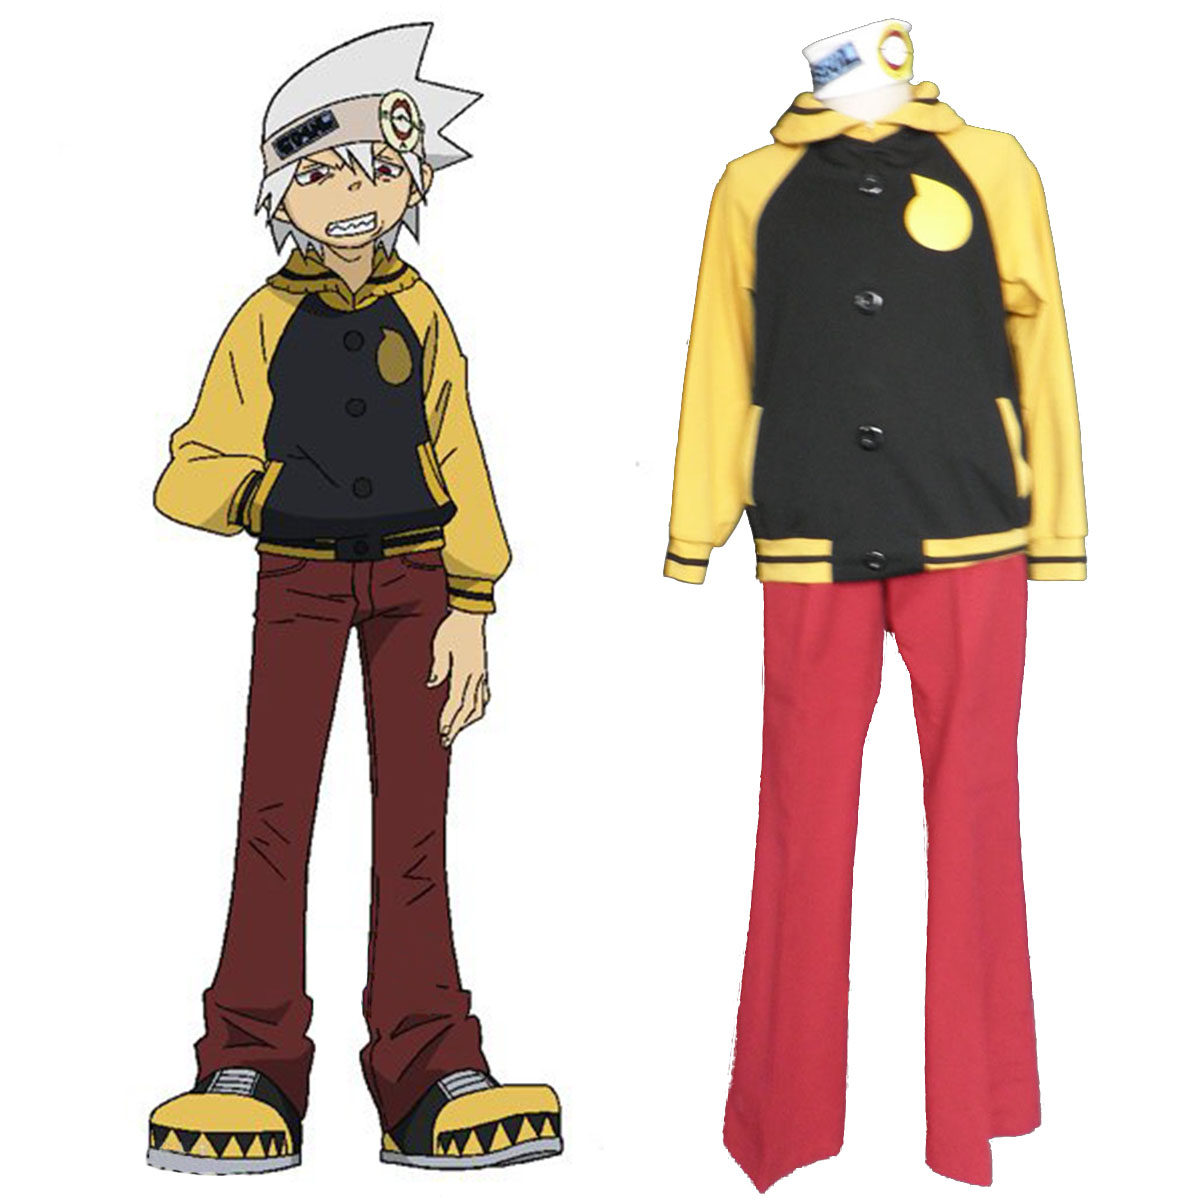 Soul Eater Soul 1 Cosplay Costumes Au Soul Eater Soul 1 Cosplay Costumes Au Au 65 60